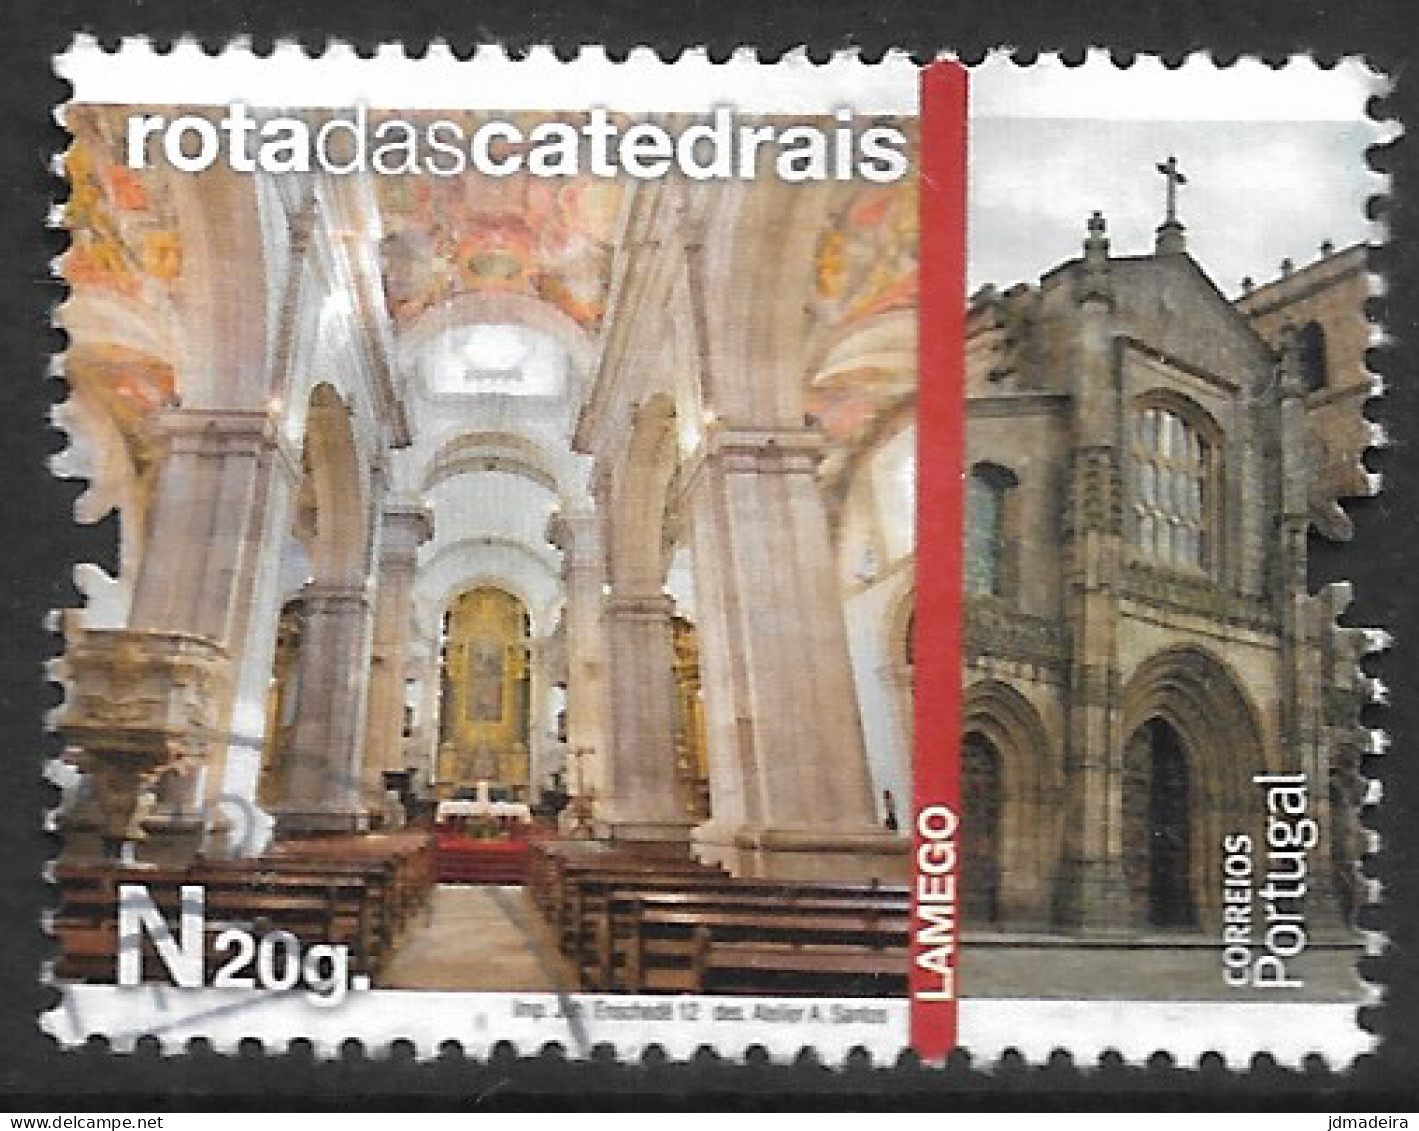 Portugal – 2012 Cathedrals 0,42 Used Stamp - Gebraucht